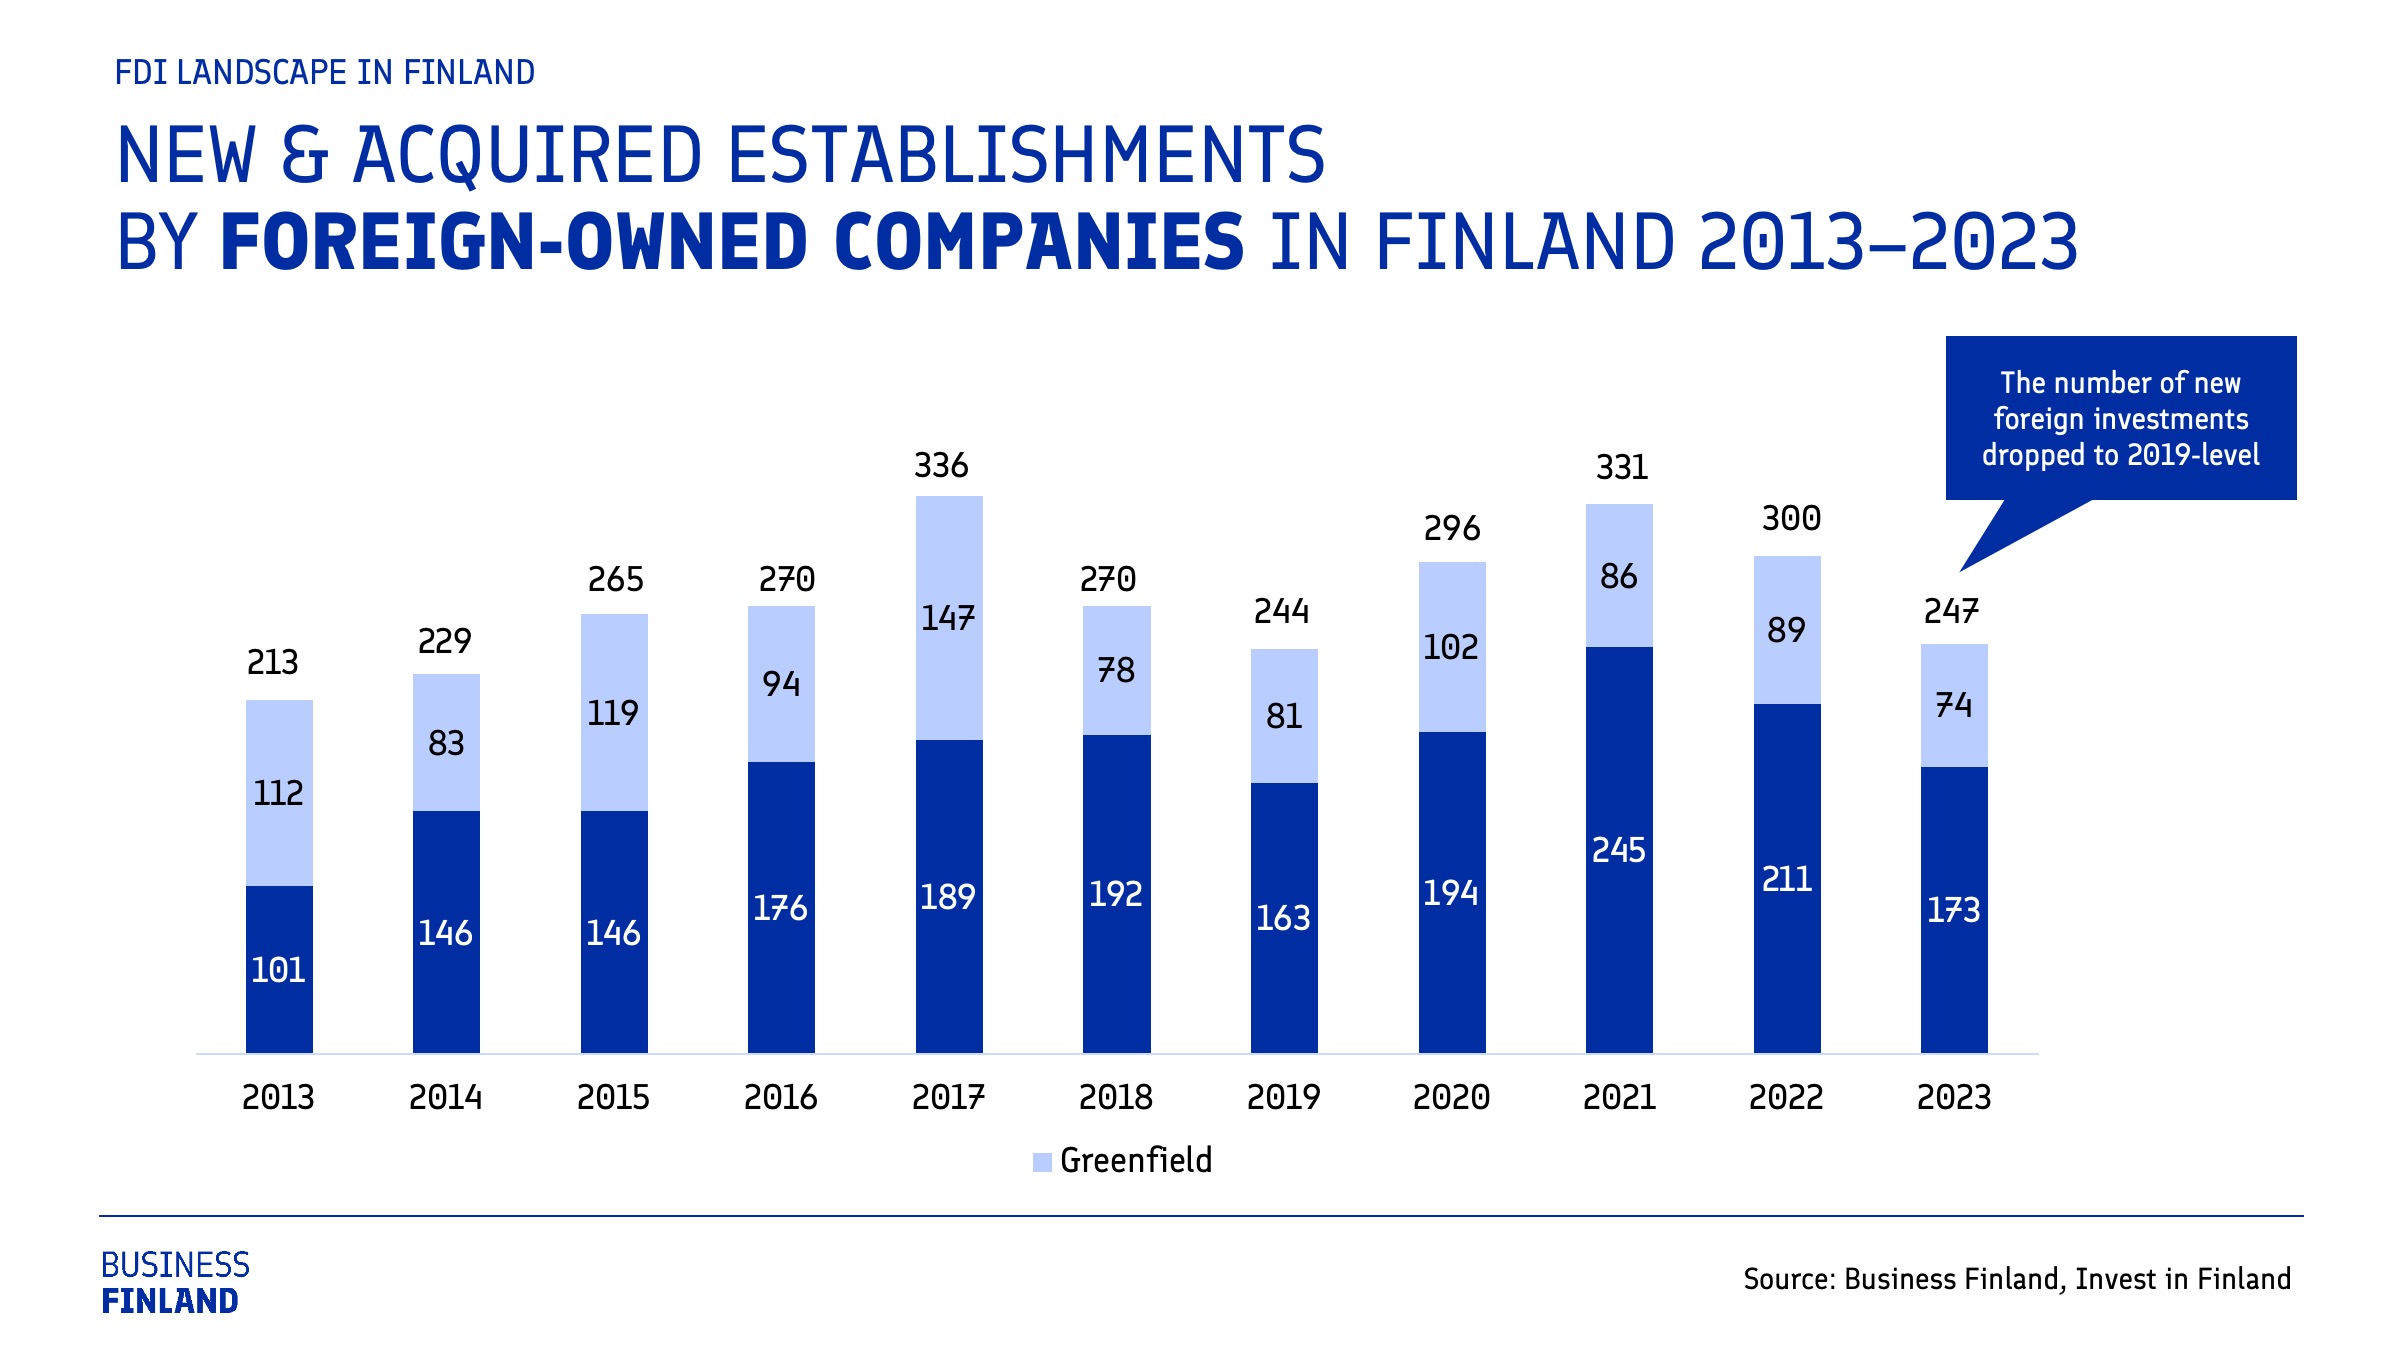 247 new foreign-owned companies to Finland in 2023